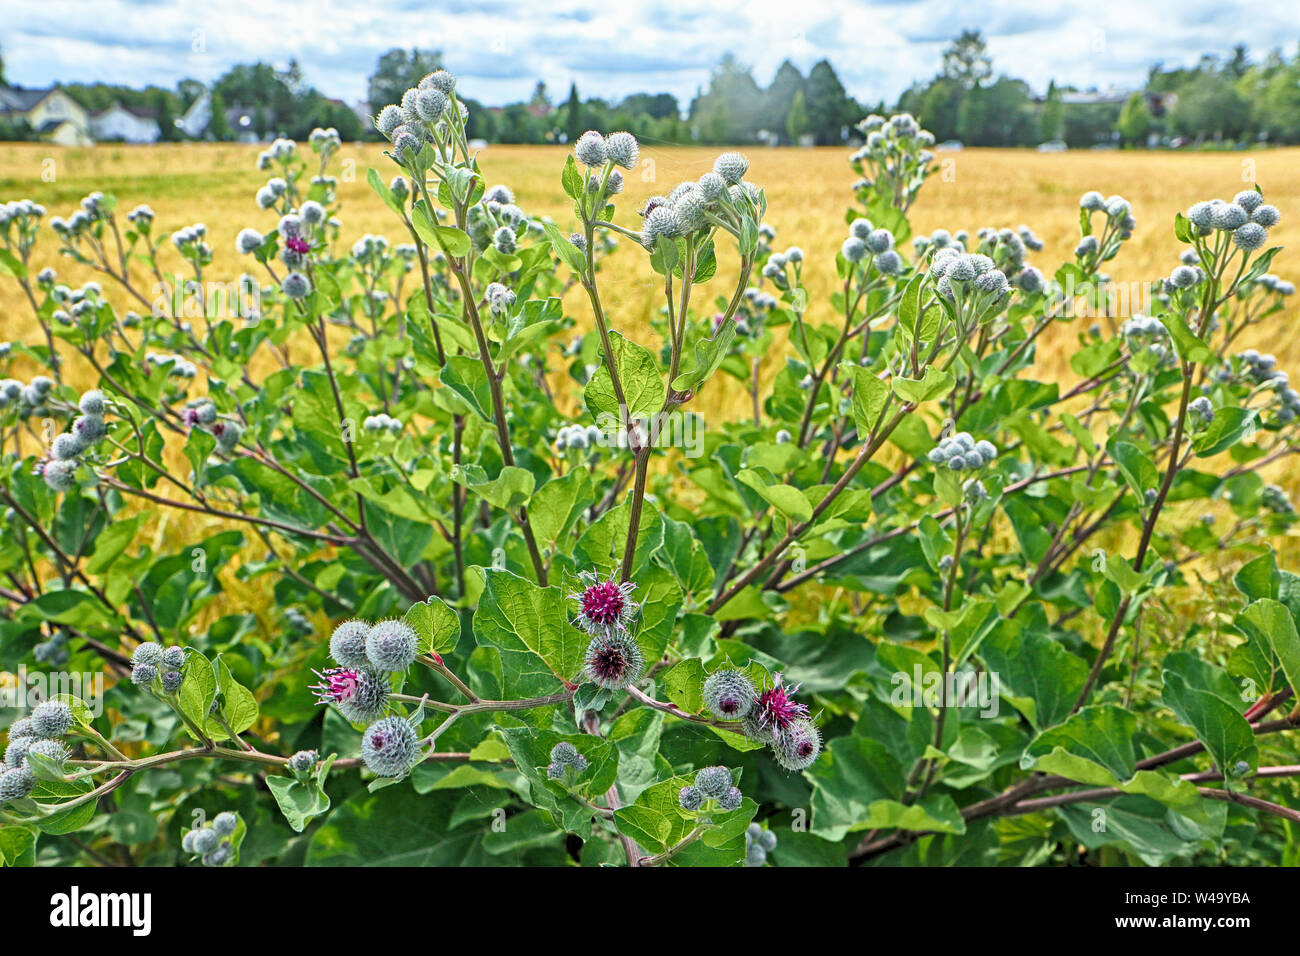 Wild greater burdock bush with purple flowers and prickly bulbs at the border of a golden wheat field in summer Stock Photo